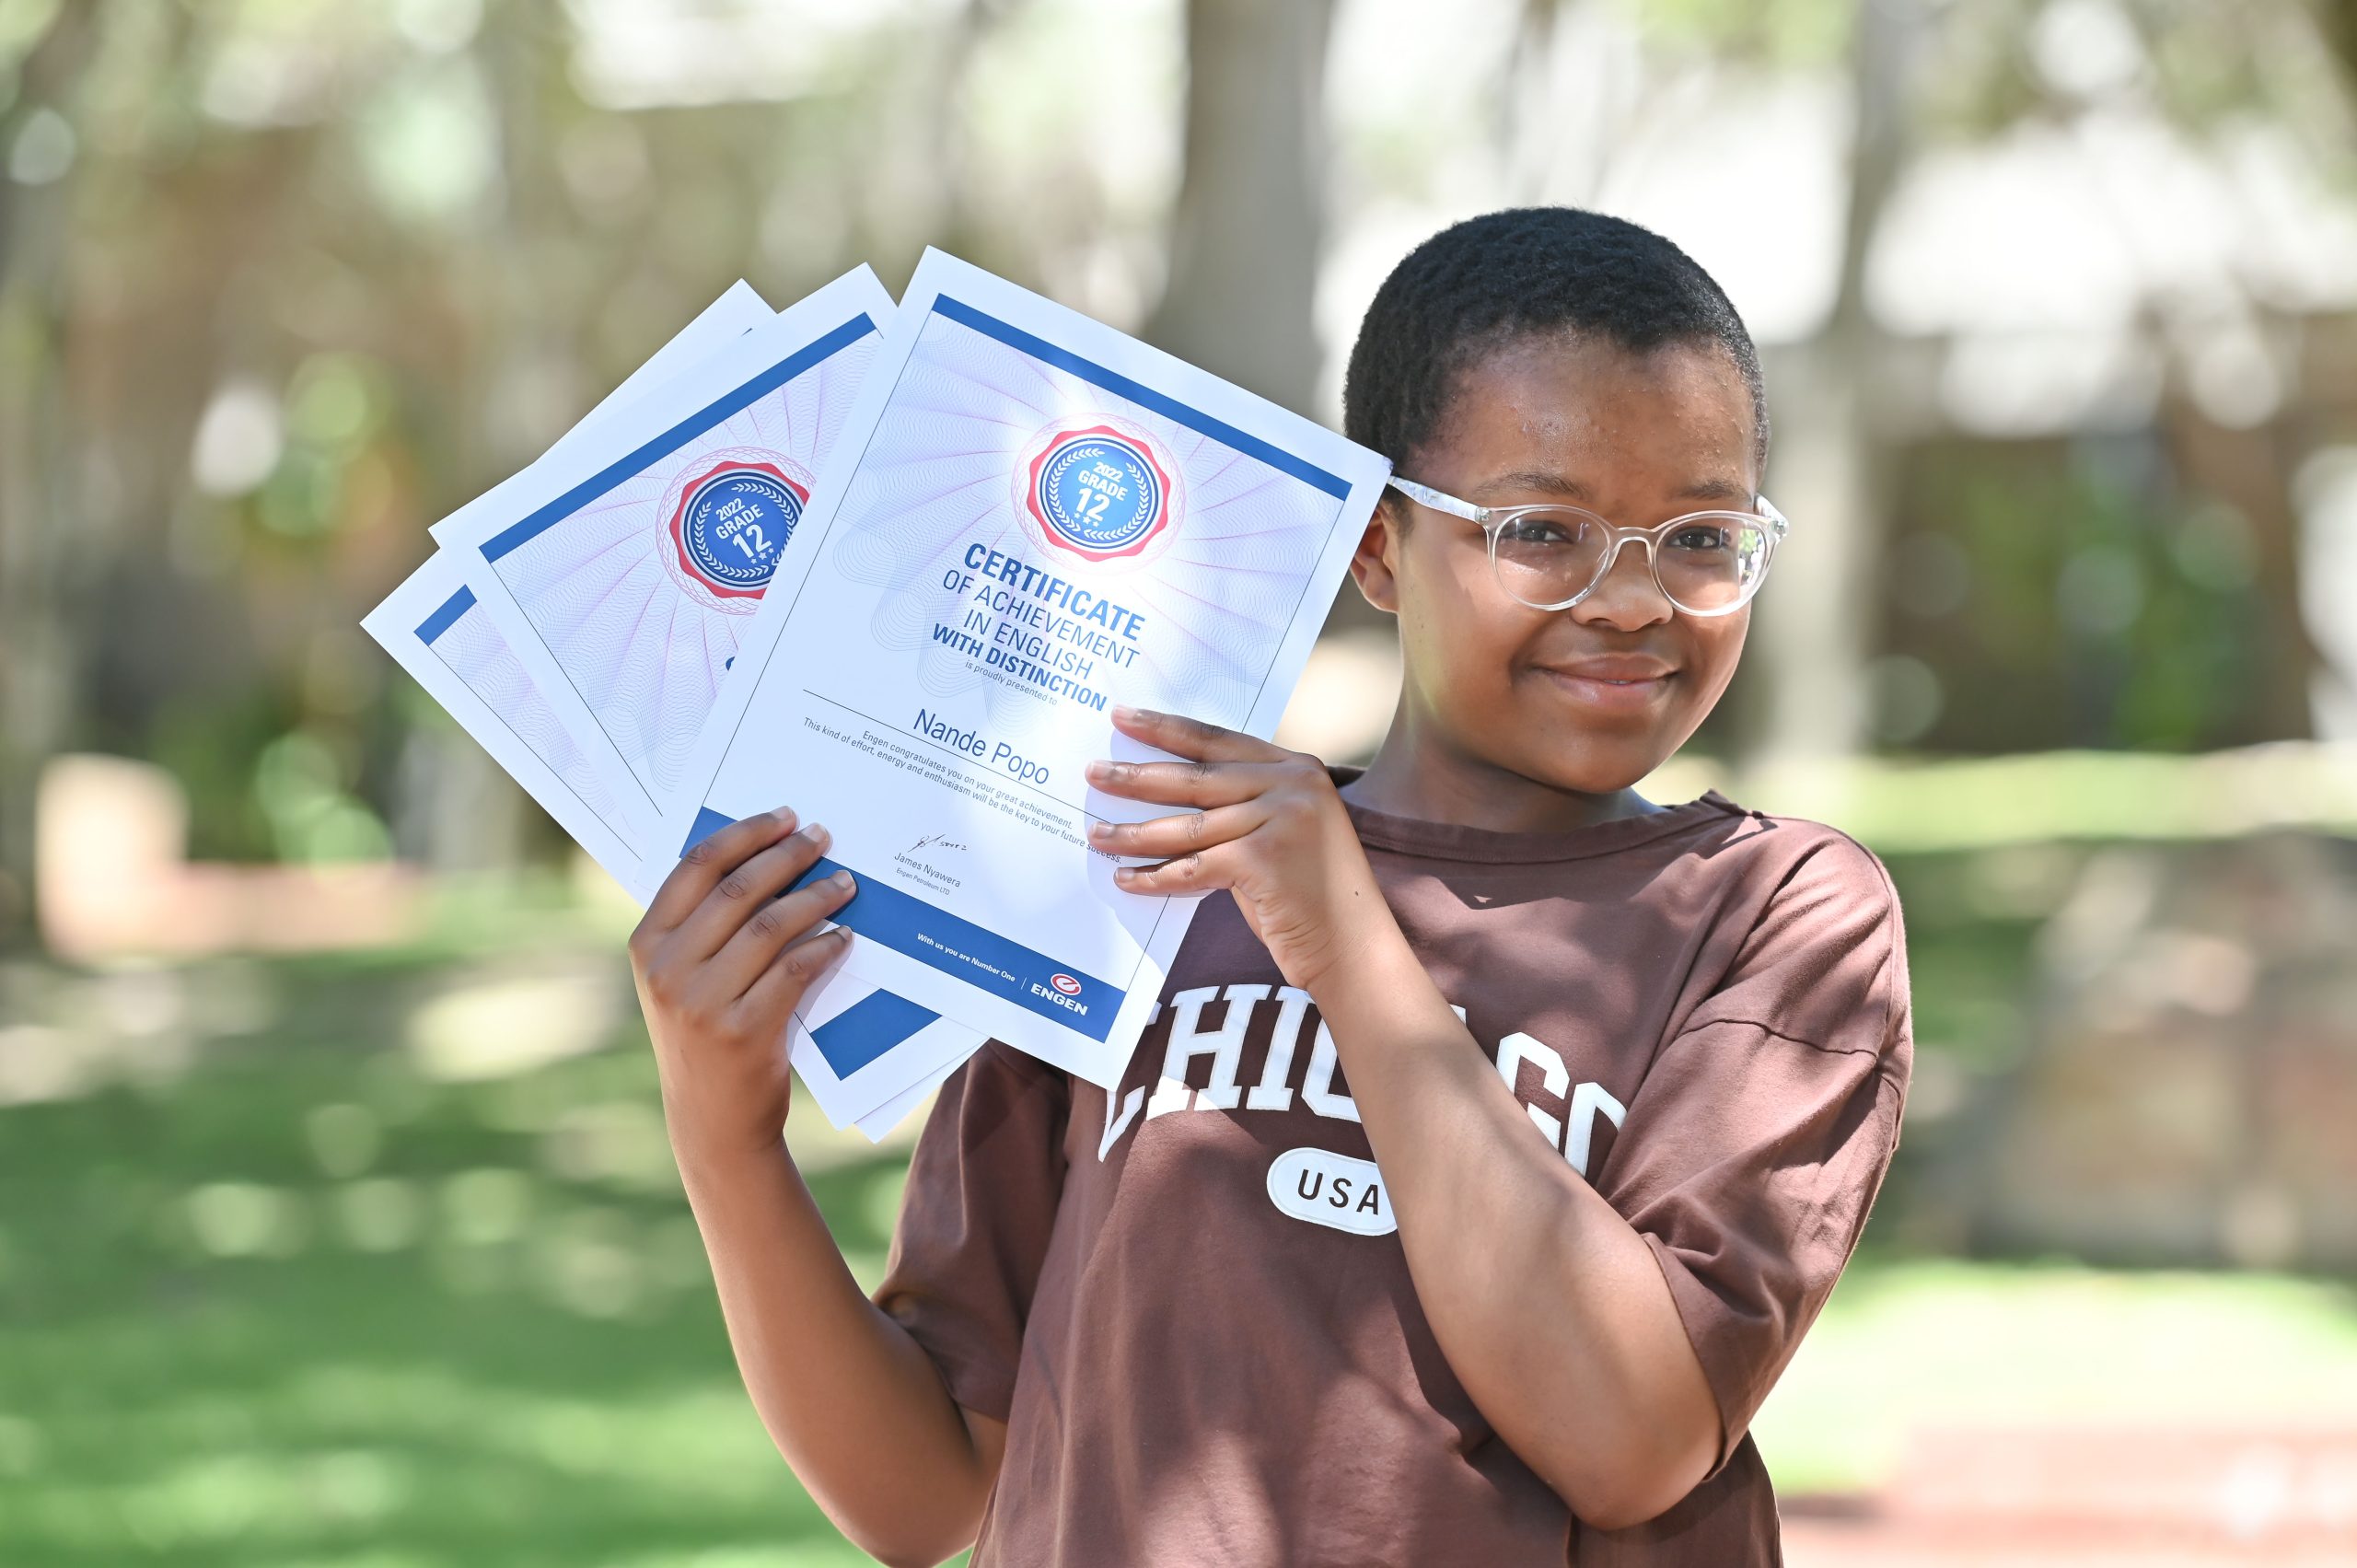 Nande Popo is the Engen top learner for 2022